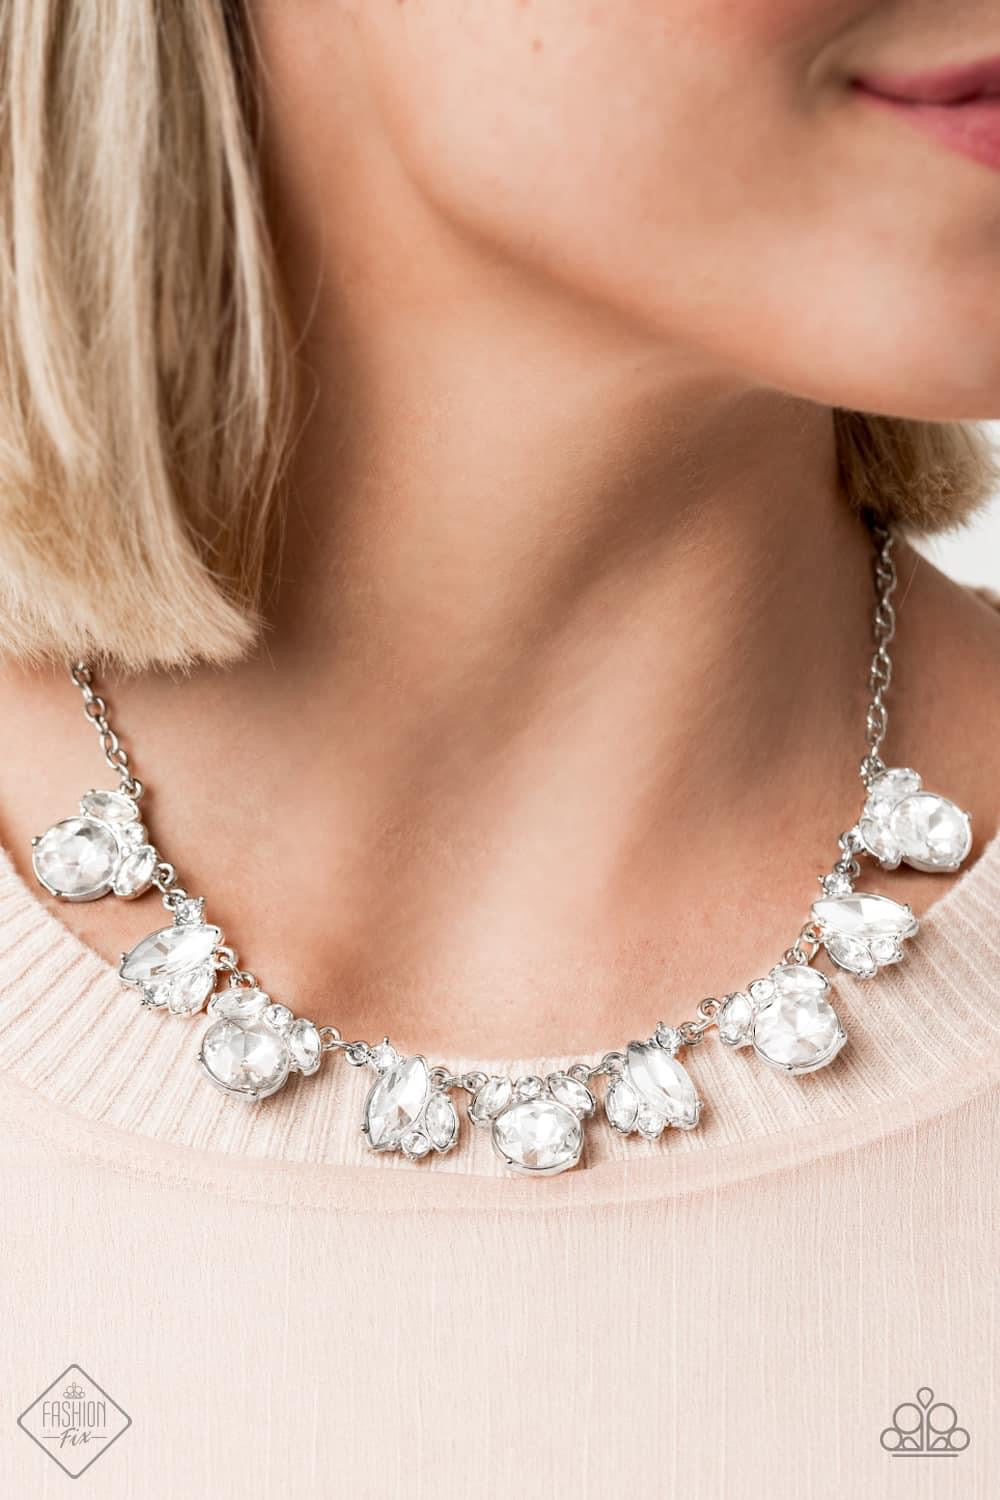 BLING to Attention - White Necklace 1308N